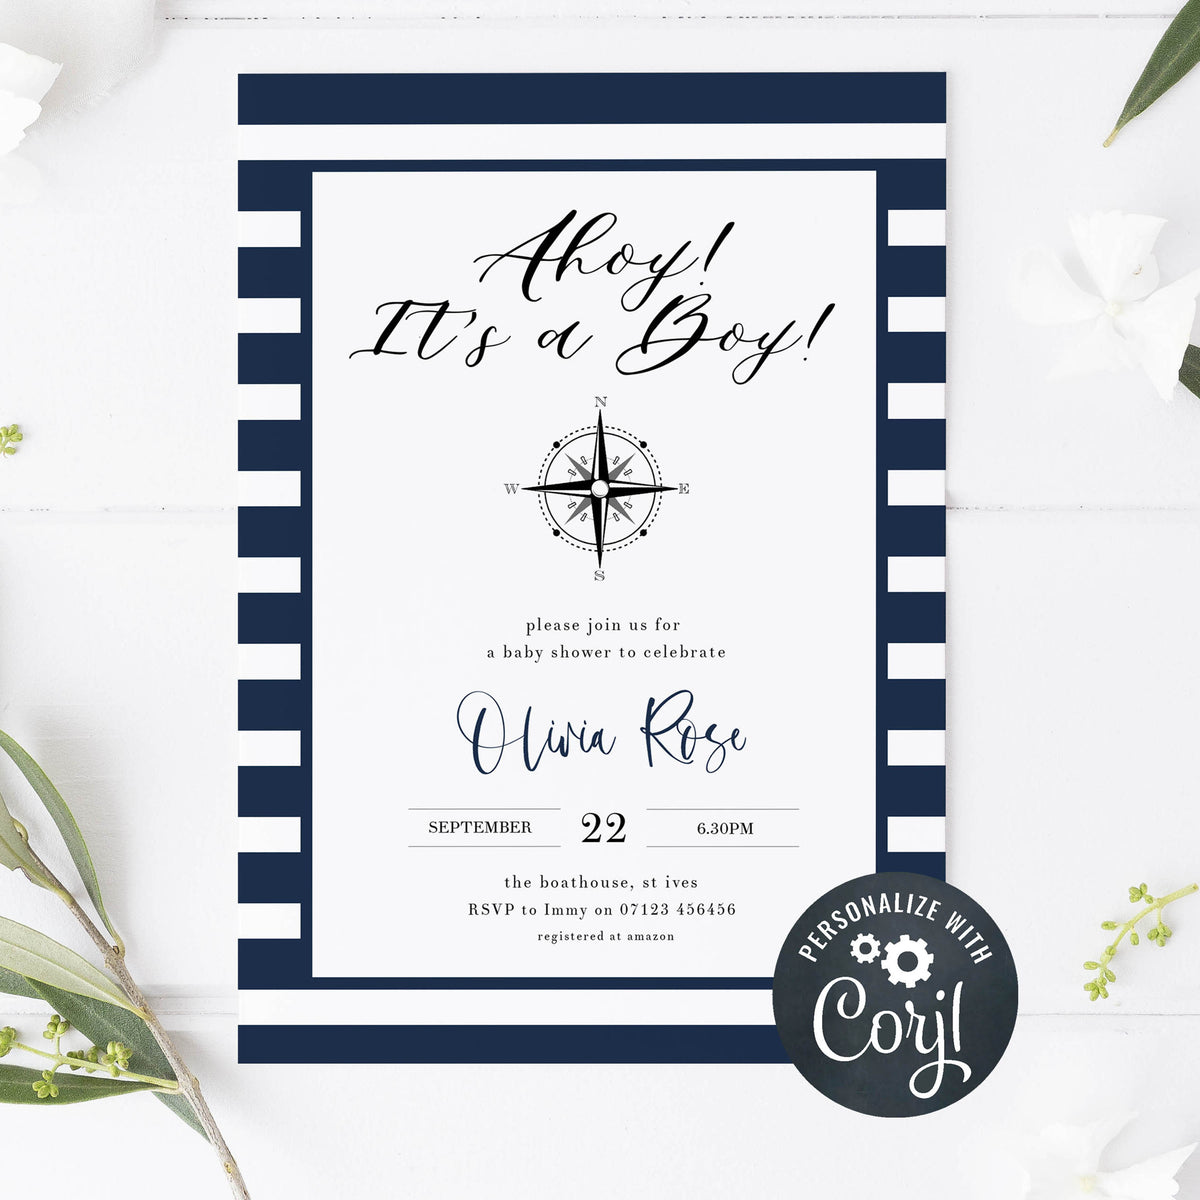 nautical baby shower invitations, printable baby shower invitations, editable baby shower invitations, ahoy its a boy baby invites, mobile baby shower invitations